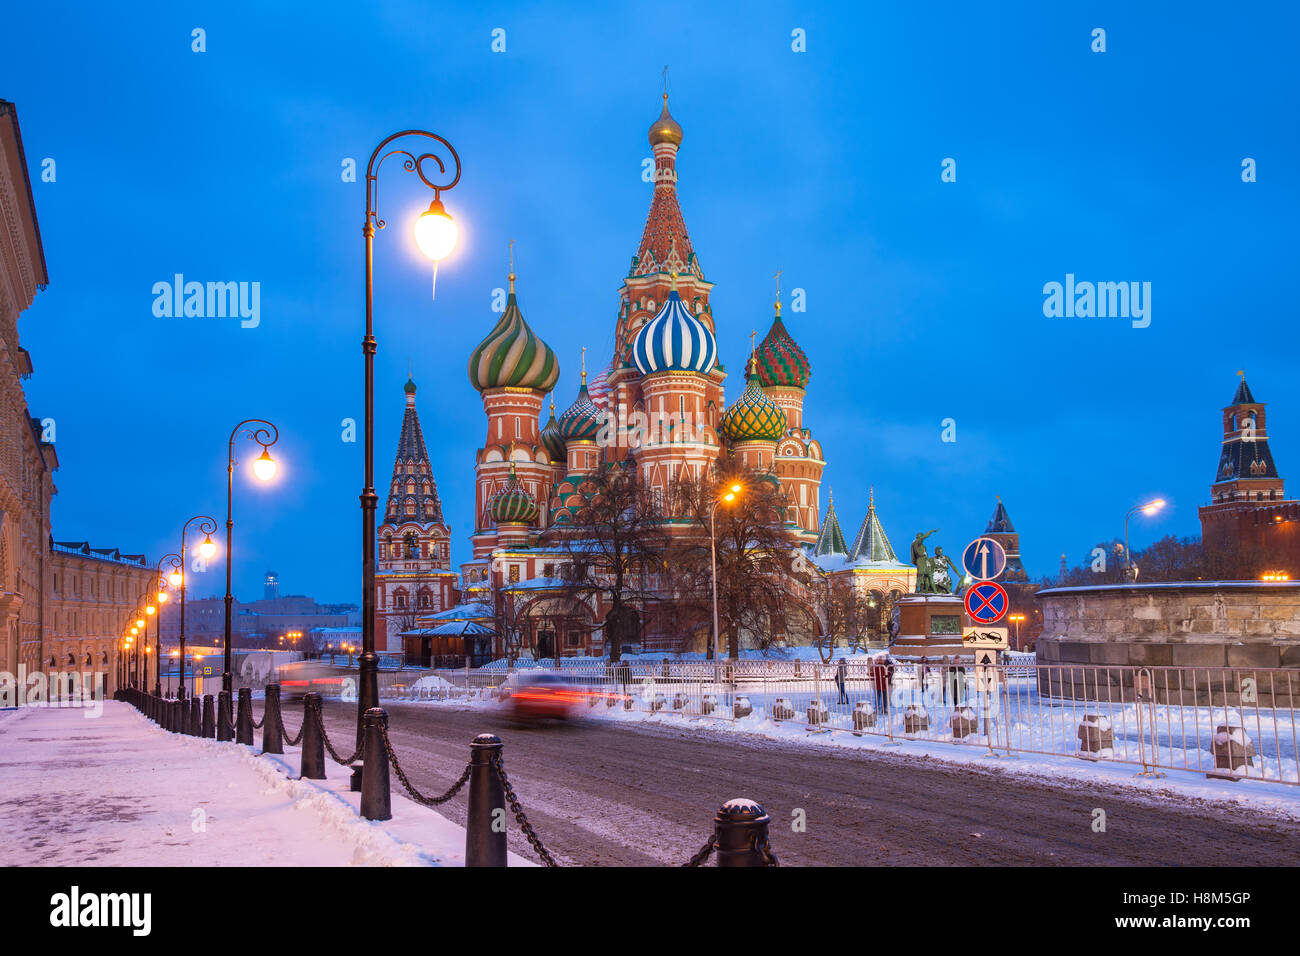 Dusk view of St. Basils Cathedral in winter, Red Square, Moscow, Russia Stock Photo